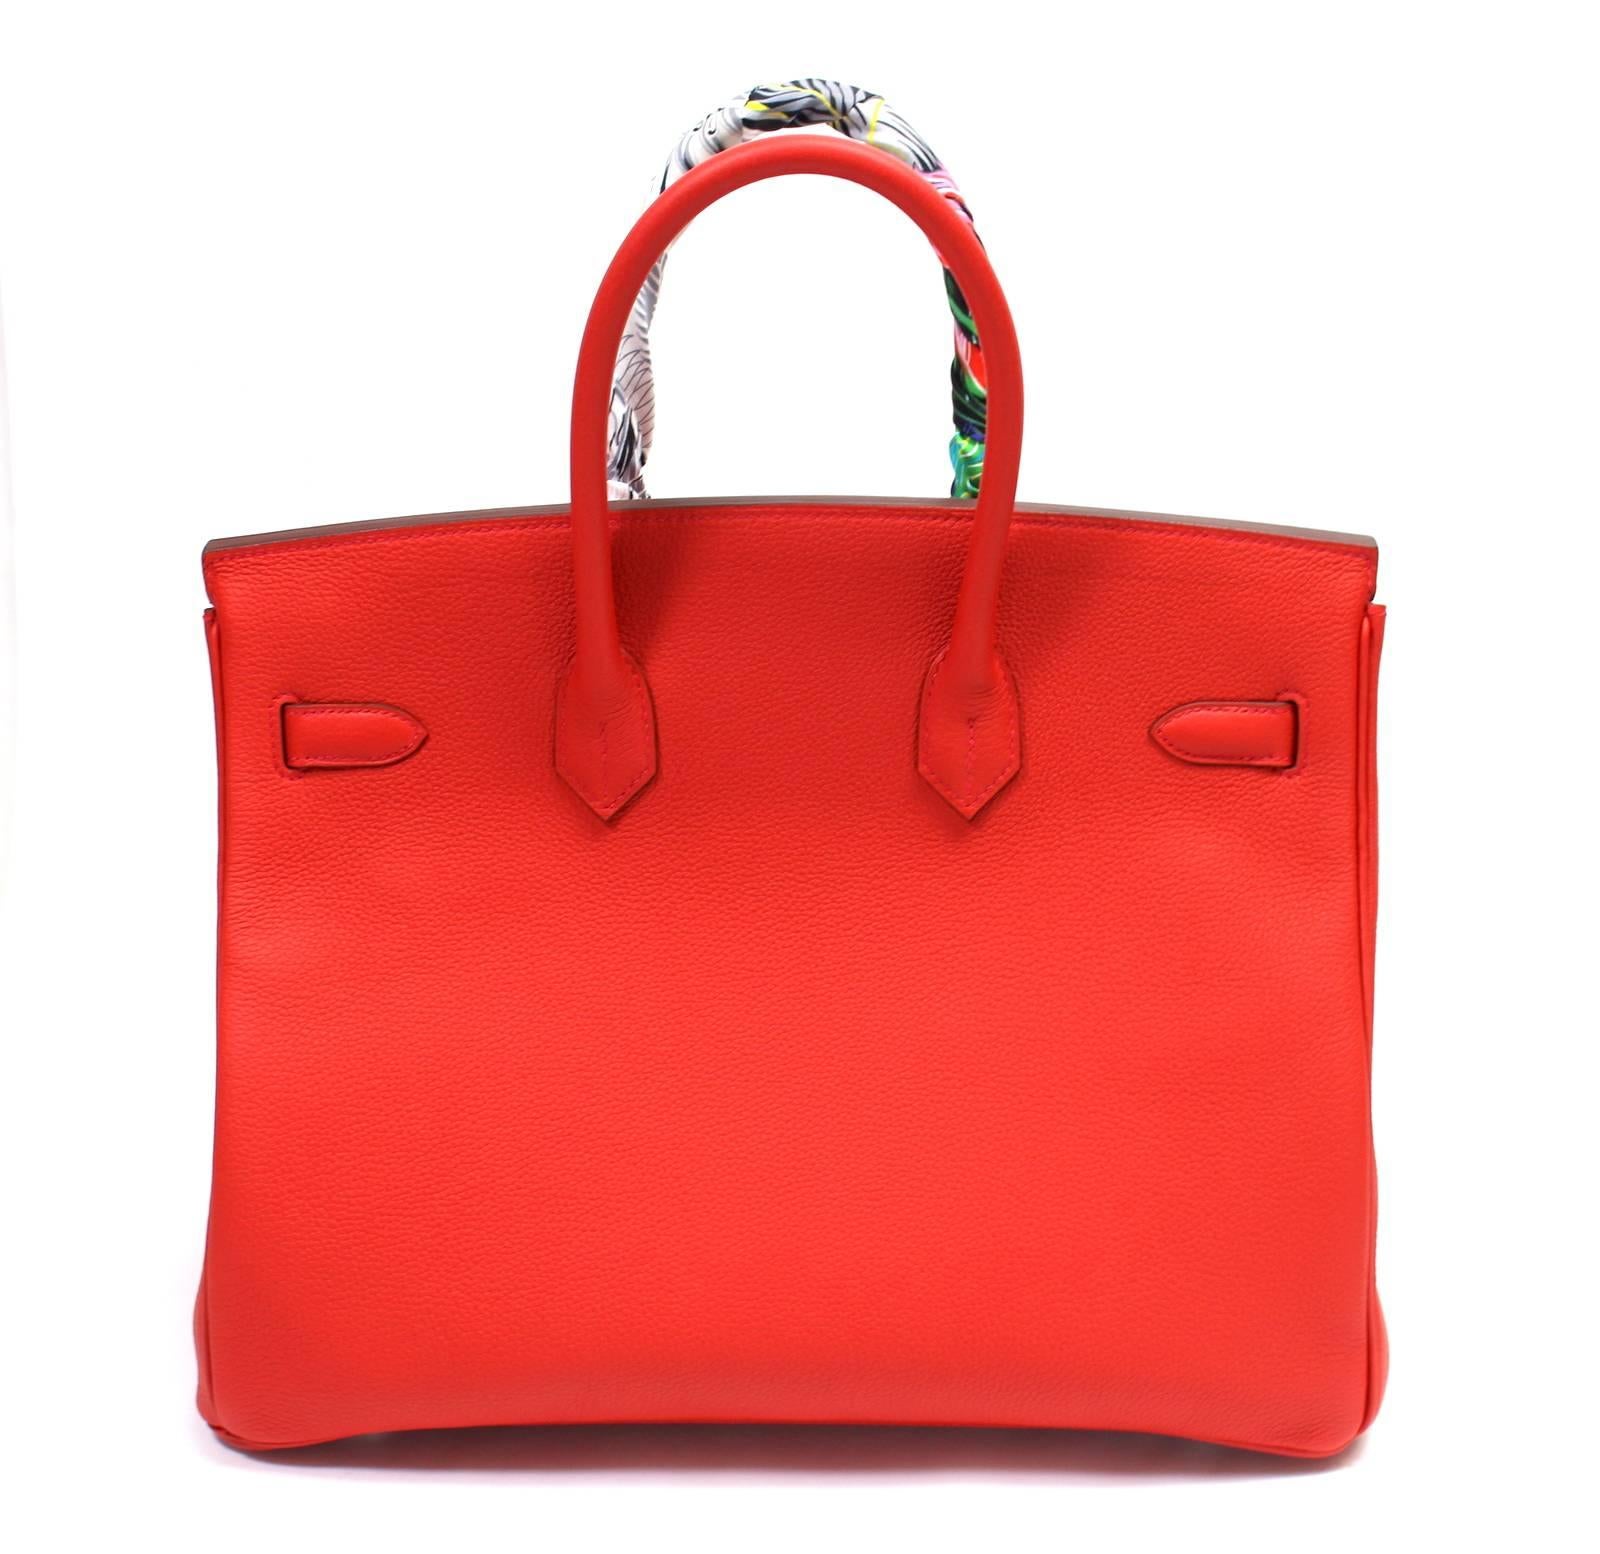 STORE FRESH Hermès Geranium Togo Leather 35 cm Birkin Bag
  The plastic is intact on all the hardware; Never Carried.  
Sought-after RED pop color remarkably complements most other hues.  
 Handcrafted by skilled craftsmen and coveted by the fashion